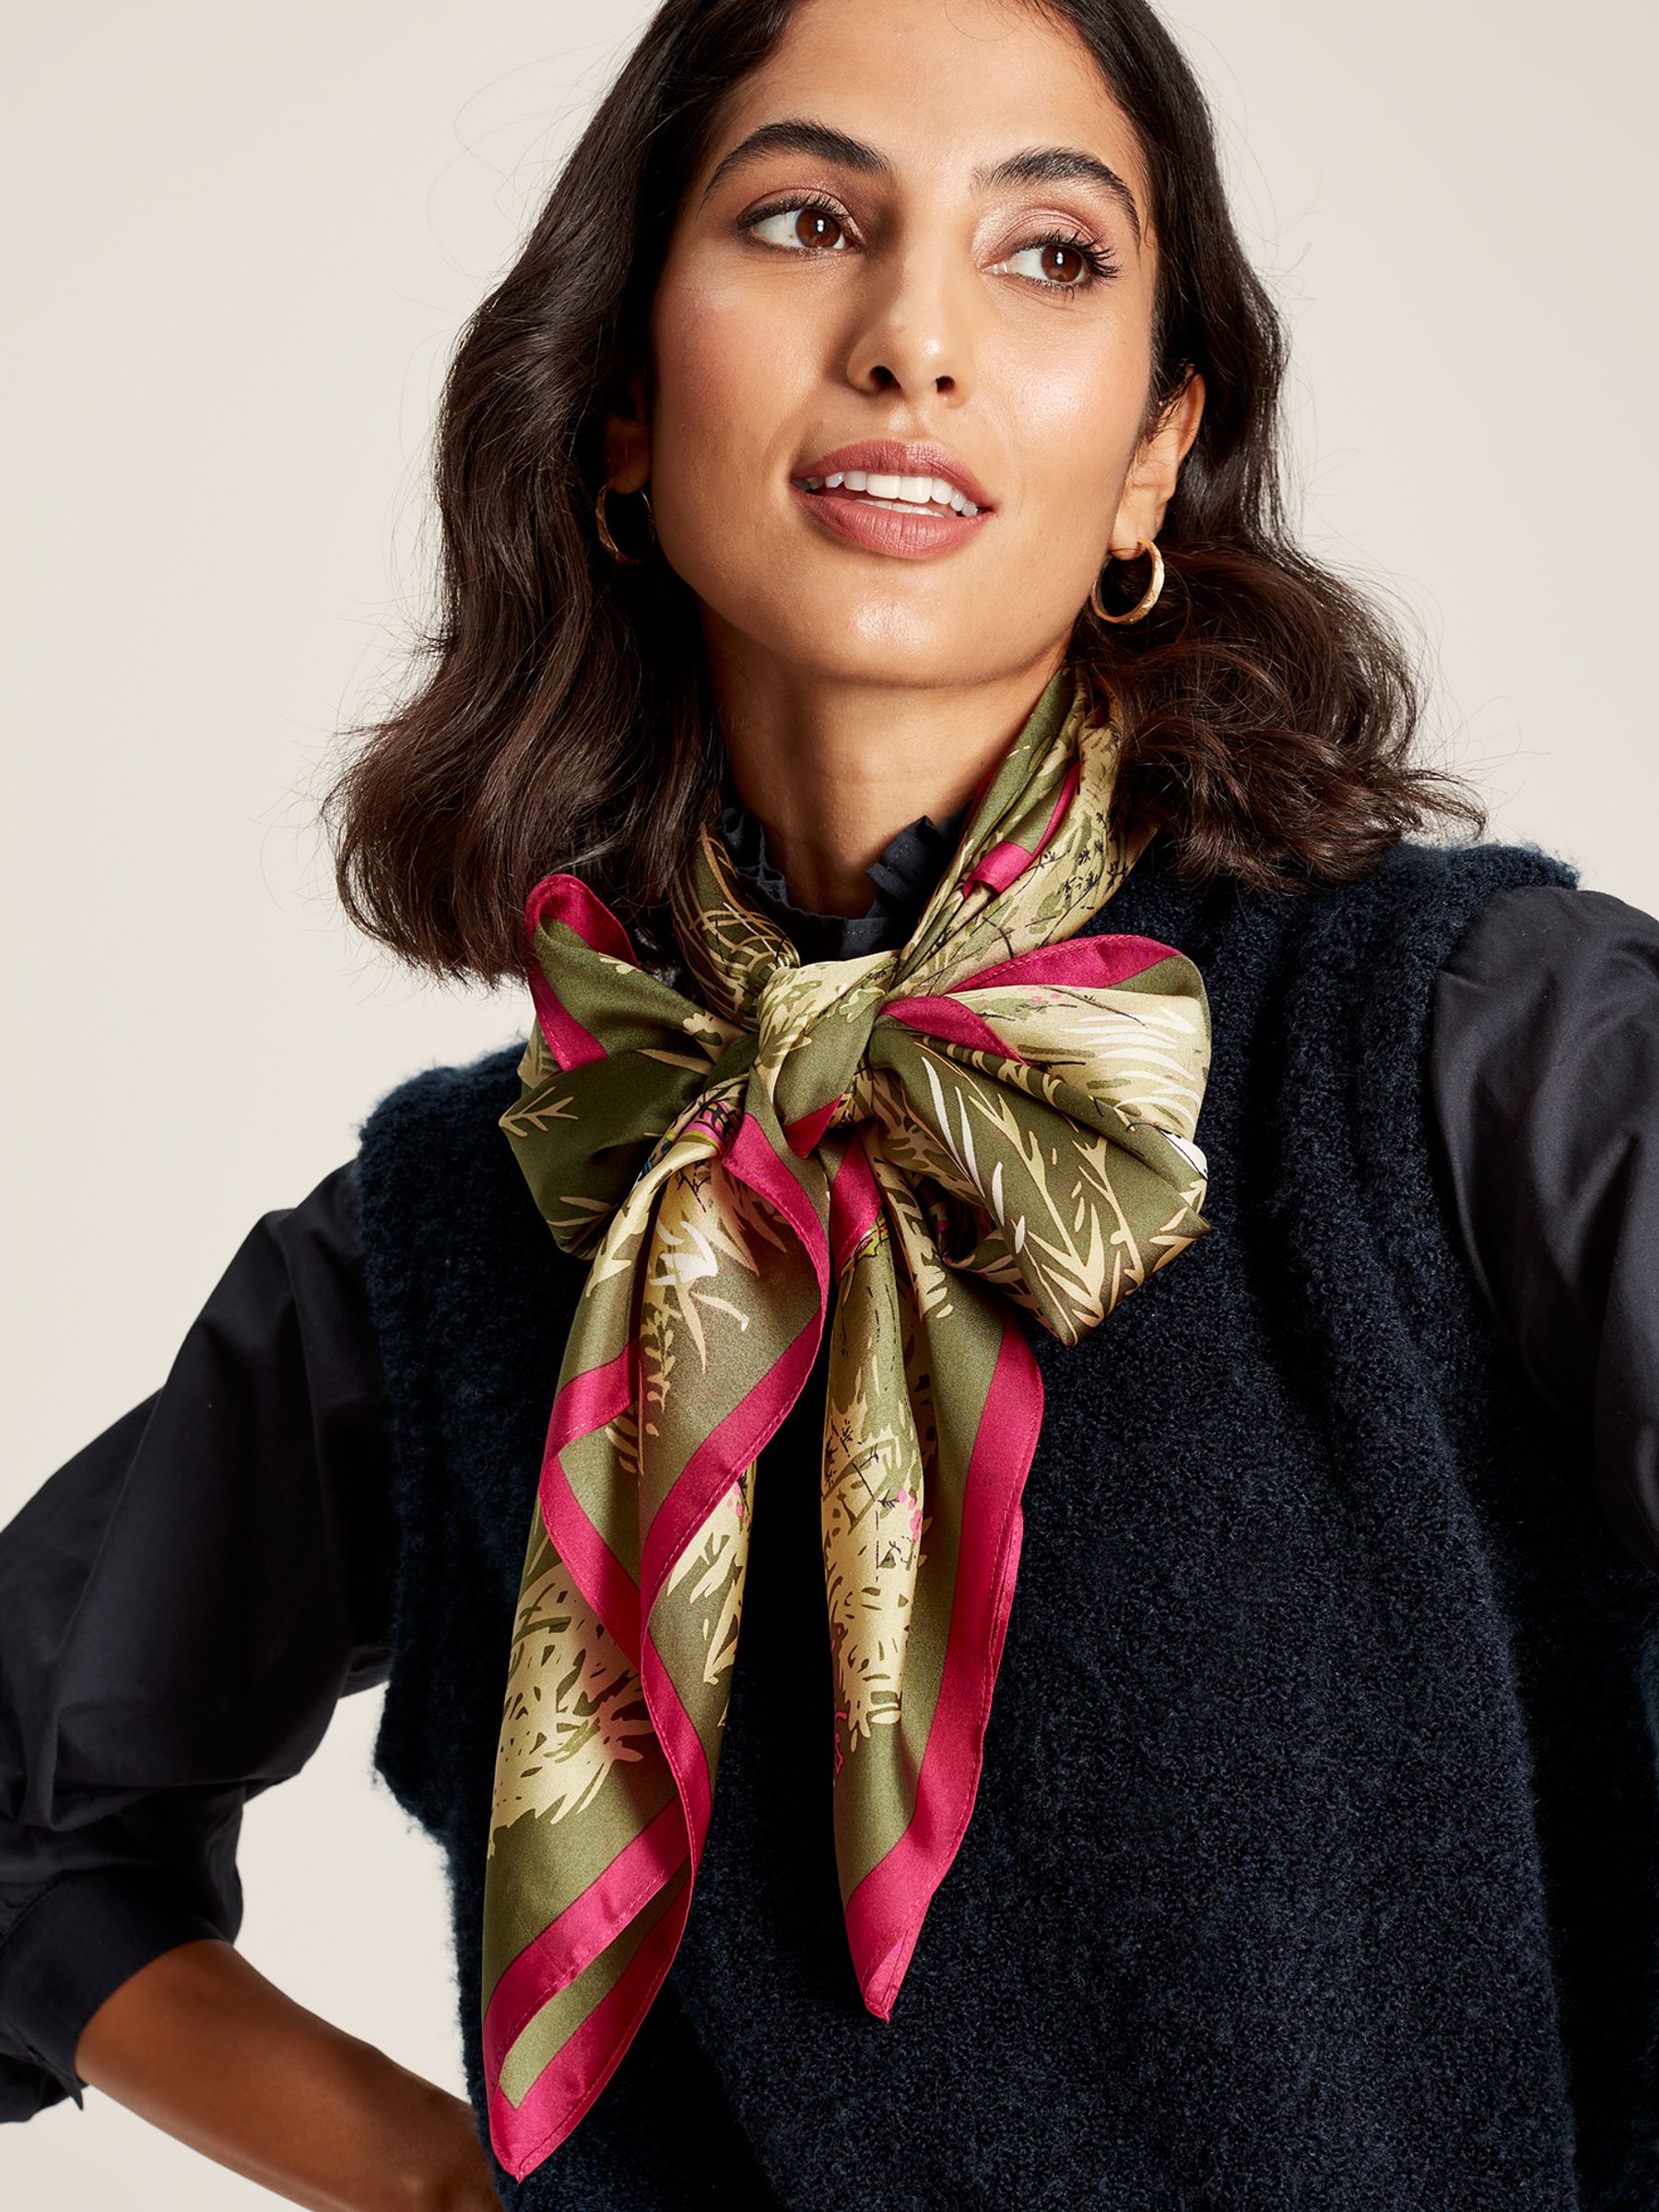 Buy Joules Bloomfield Large Square Silk Scarf from the Joules online shop